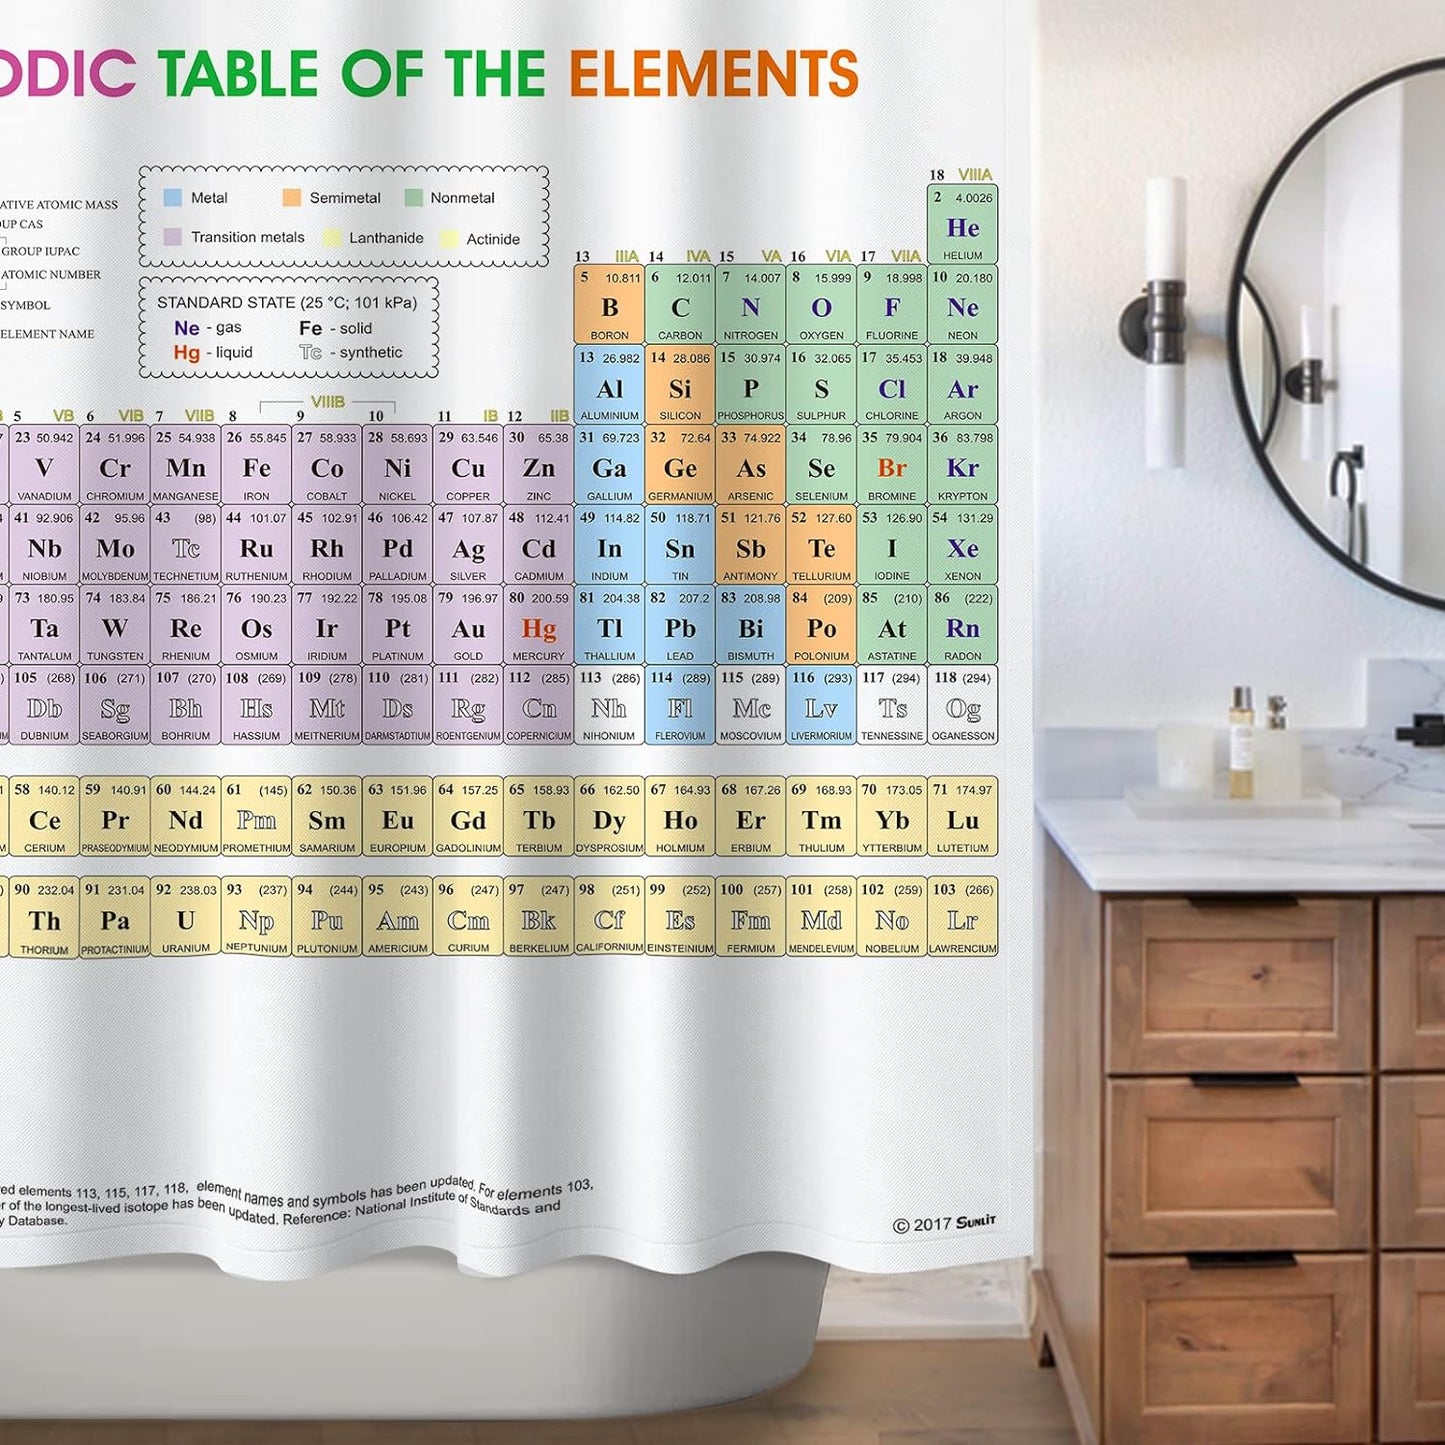 Updated Periodic Table of Elements Fabric Shower Curtains for Chemistry Students and Teacher Use as Poster.